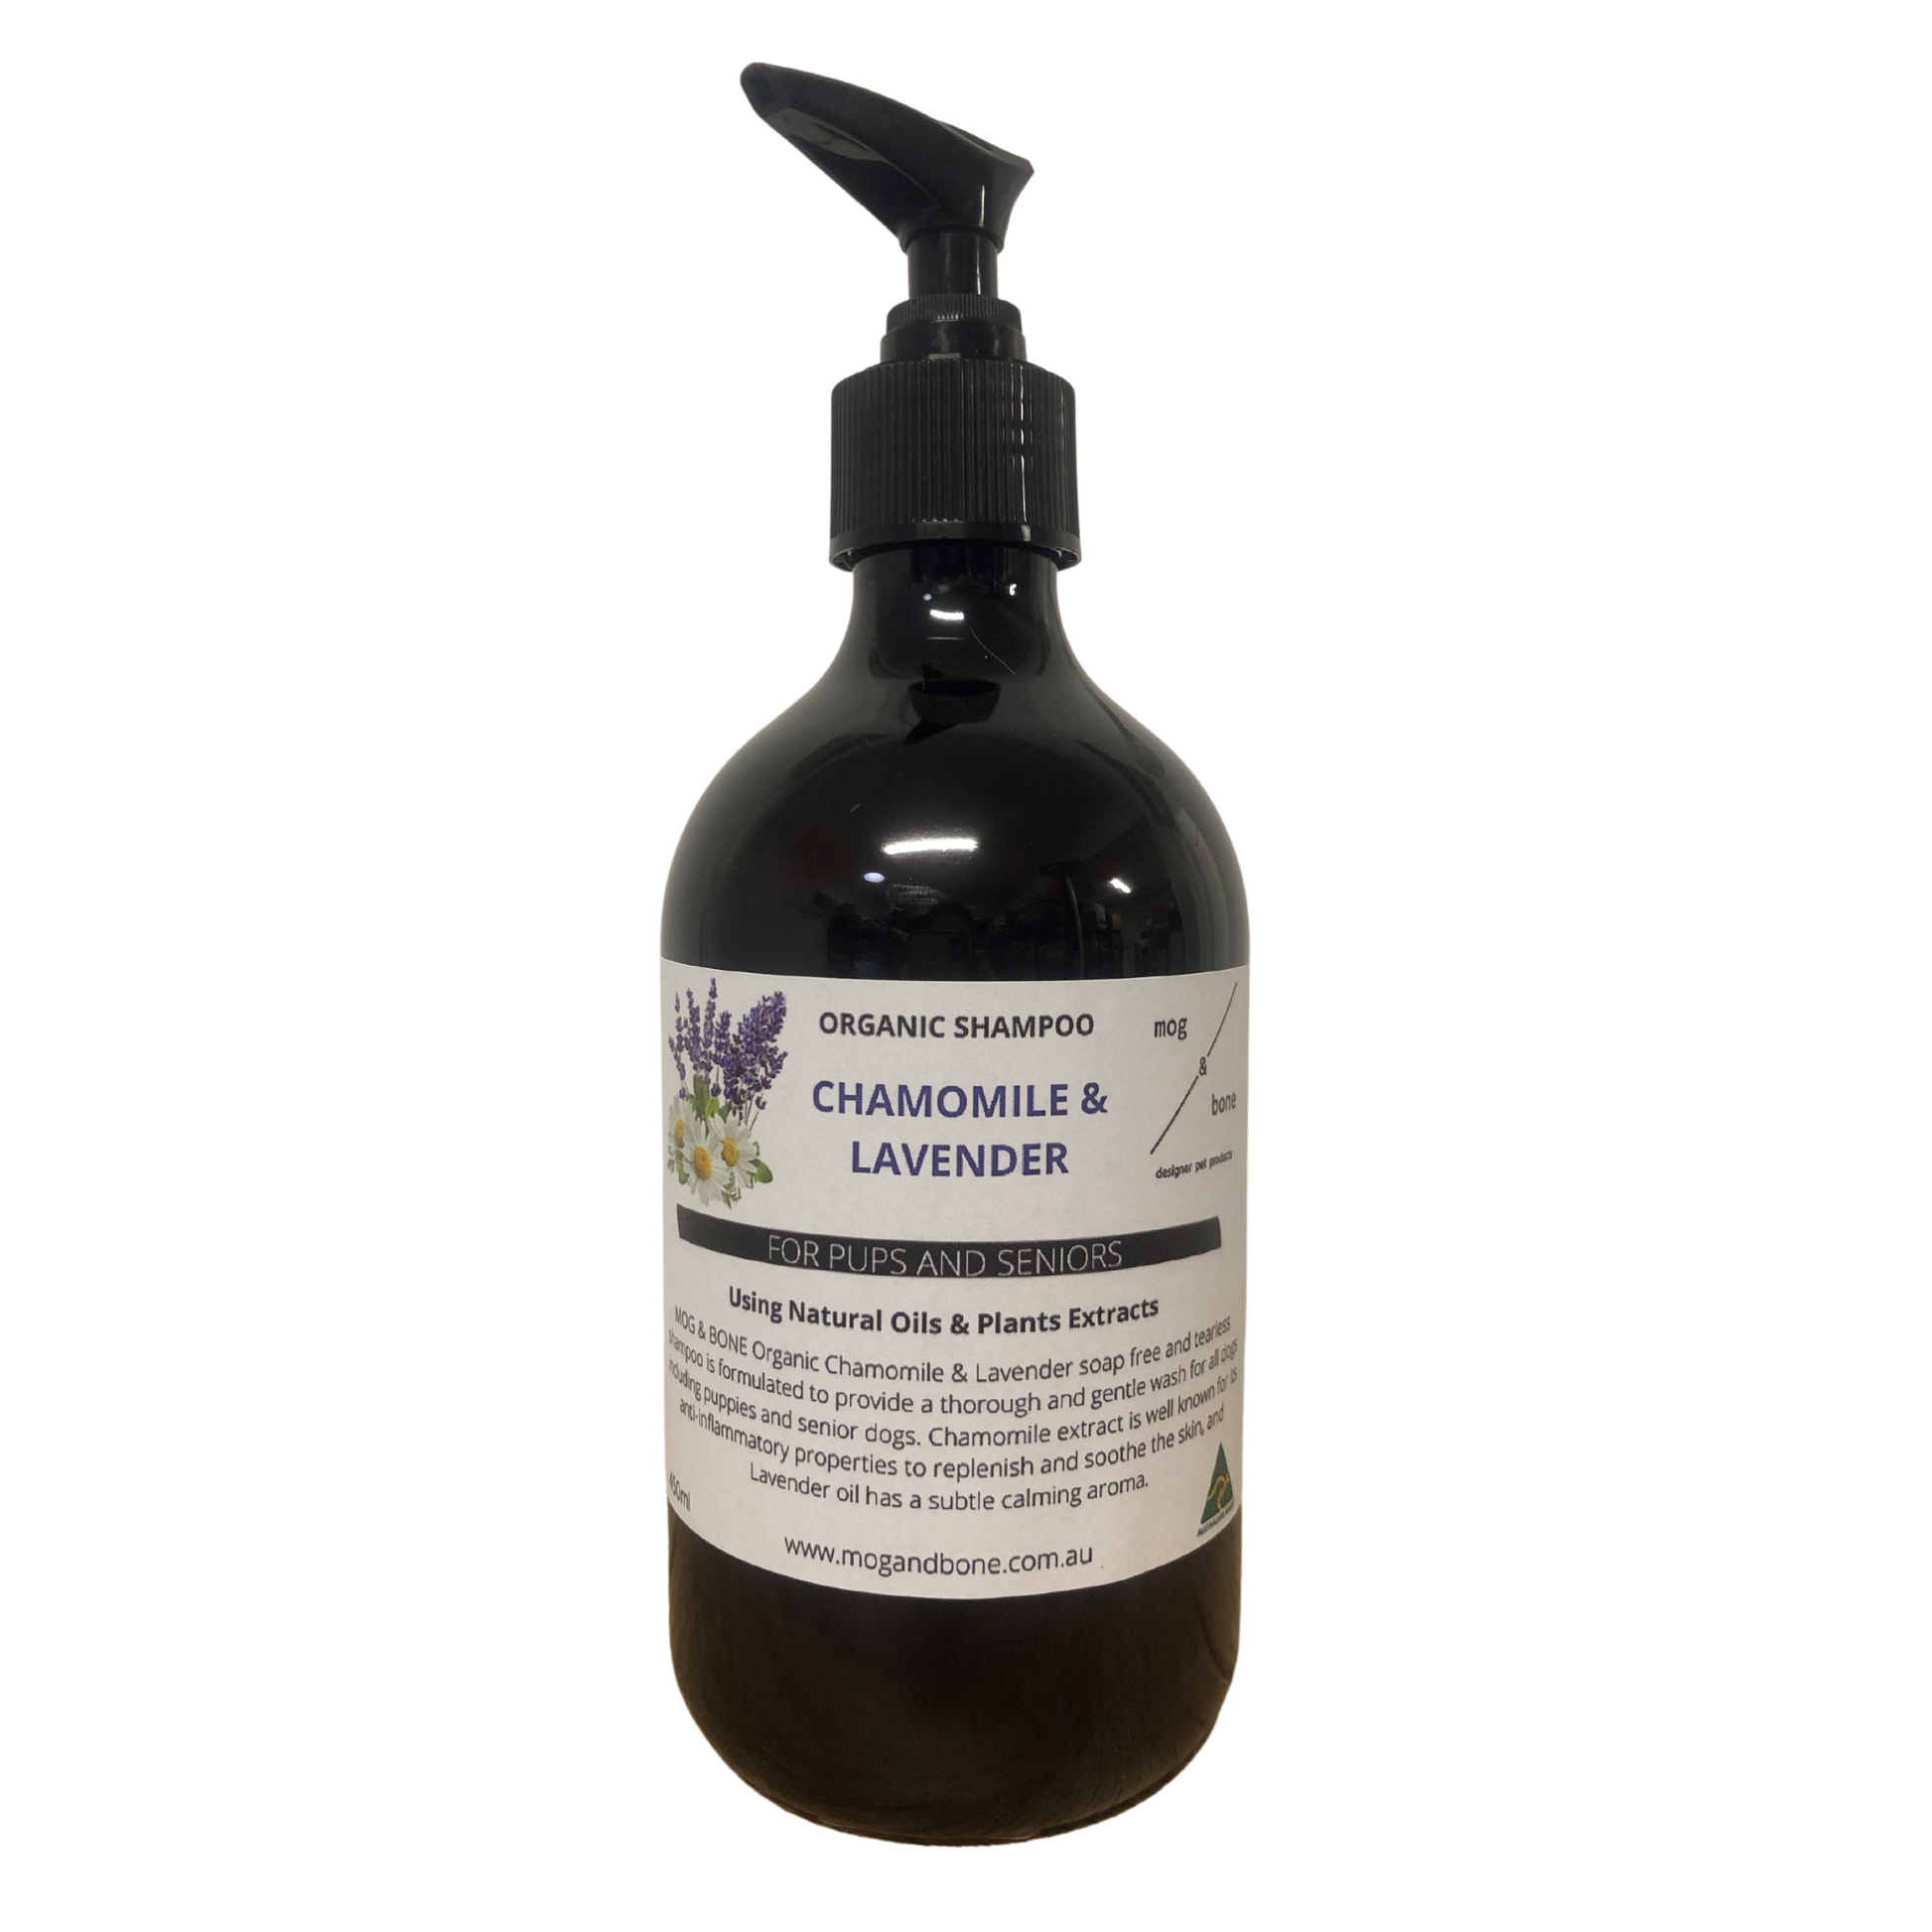 CHAMOMILE AND LAVENDER DOG SHAMPOO Soap and tear free soothing care shampoo for pups and seniors